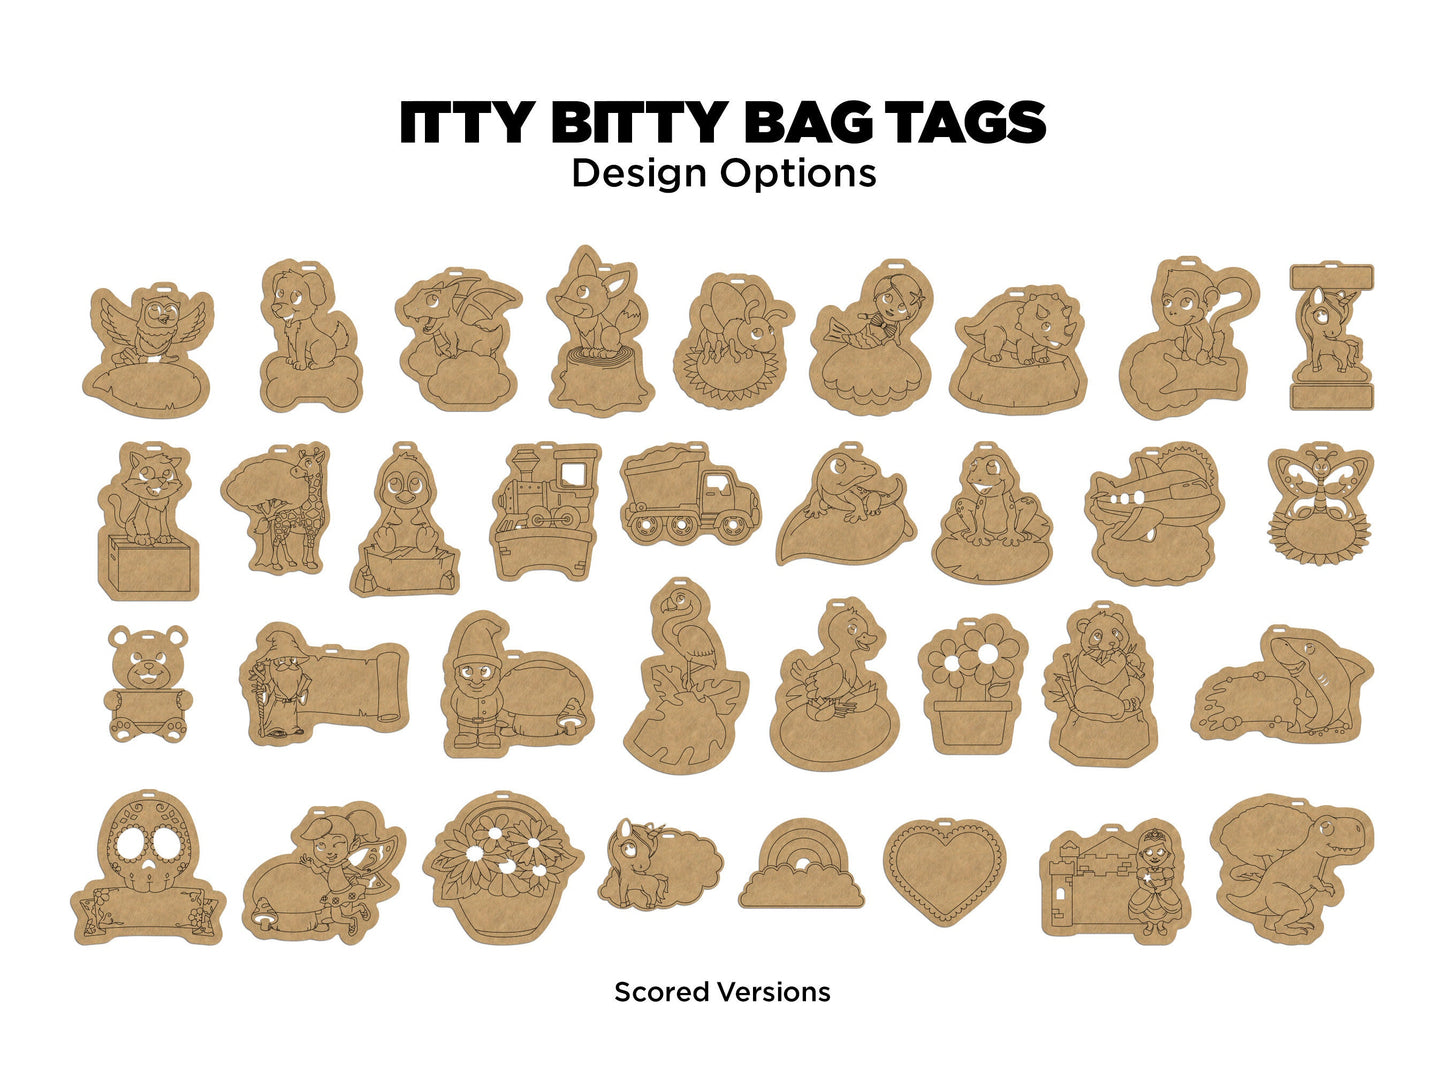 Itty Bitty Bag Tags - 34 Original Designs available in Cut, Engrave, Score Formats - SVG File Download - Sized & Tested in Glowforge